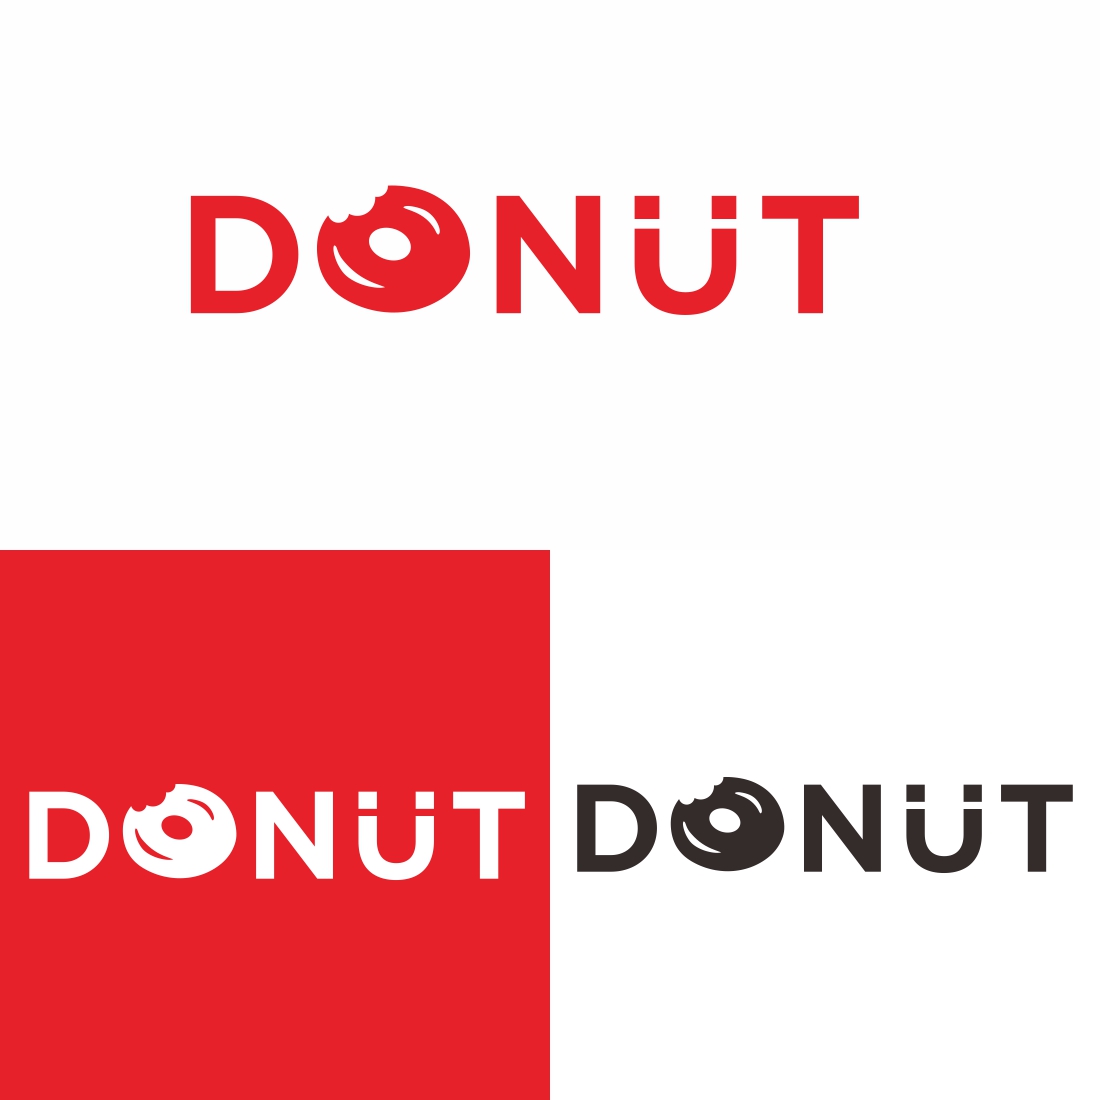 Donut vector logo Sweet food logo, can be used for bakery product logos, trademarks, or food business logos preview image.